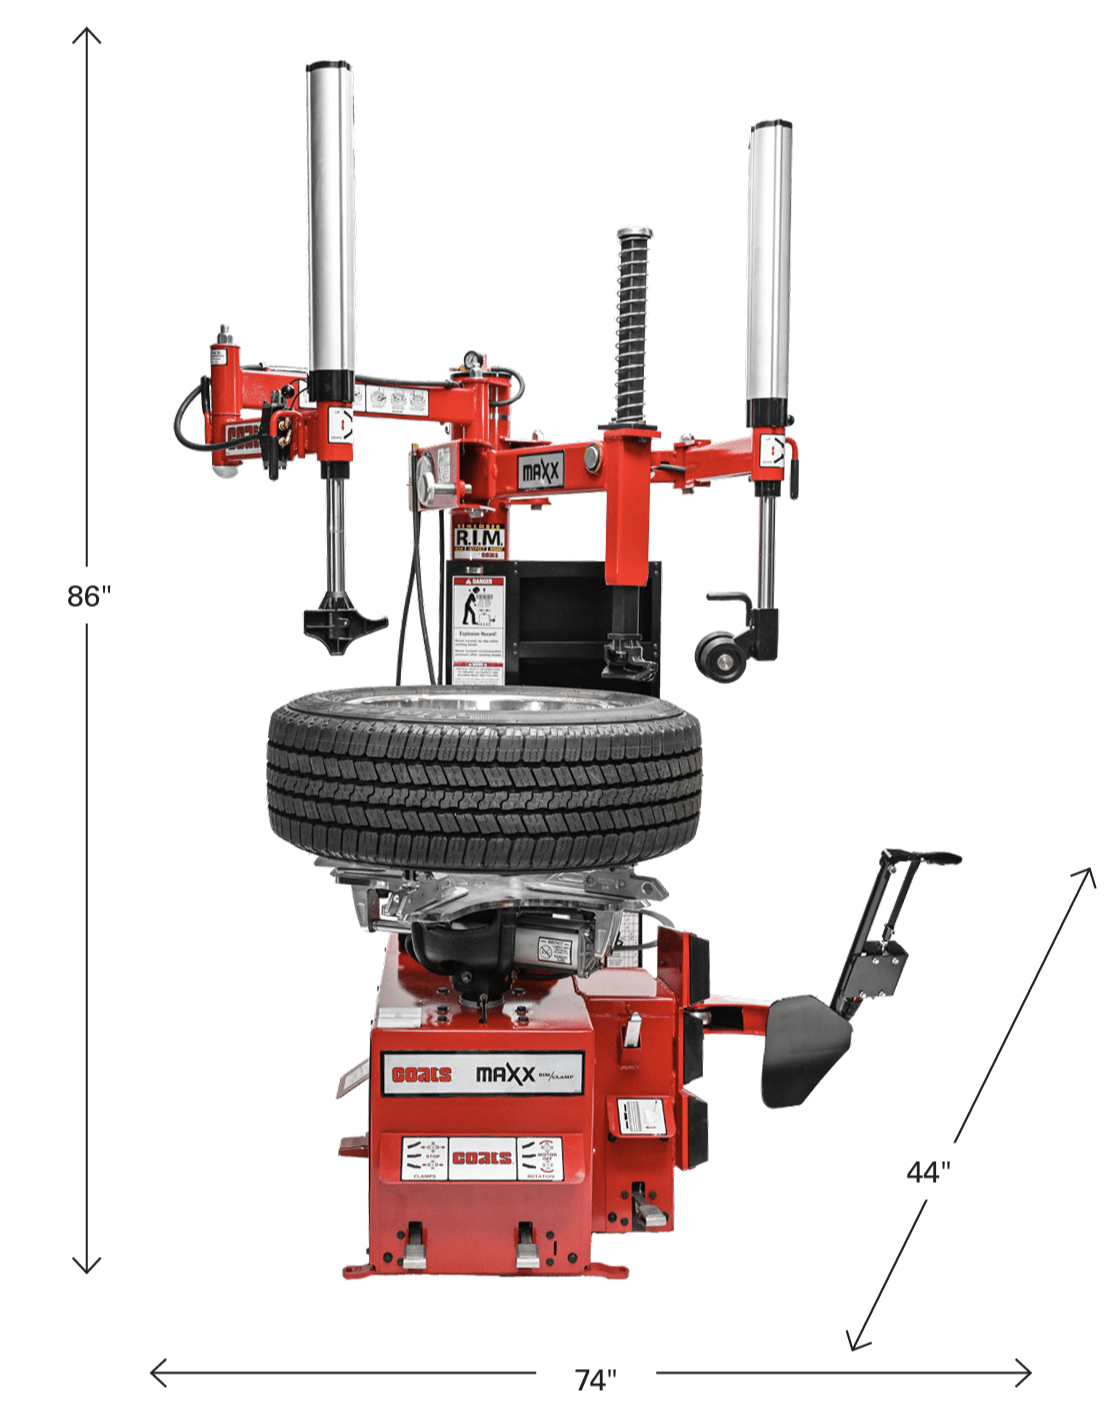 Front diagram of a Maxx 80 showing height, width, and length, dimensions